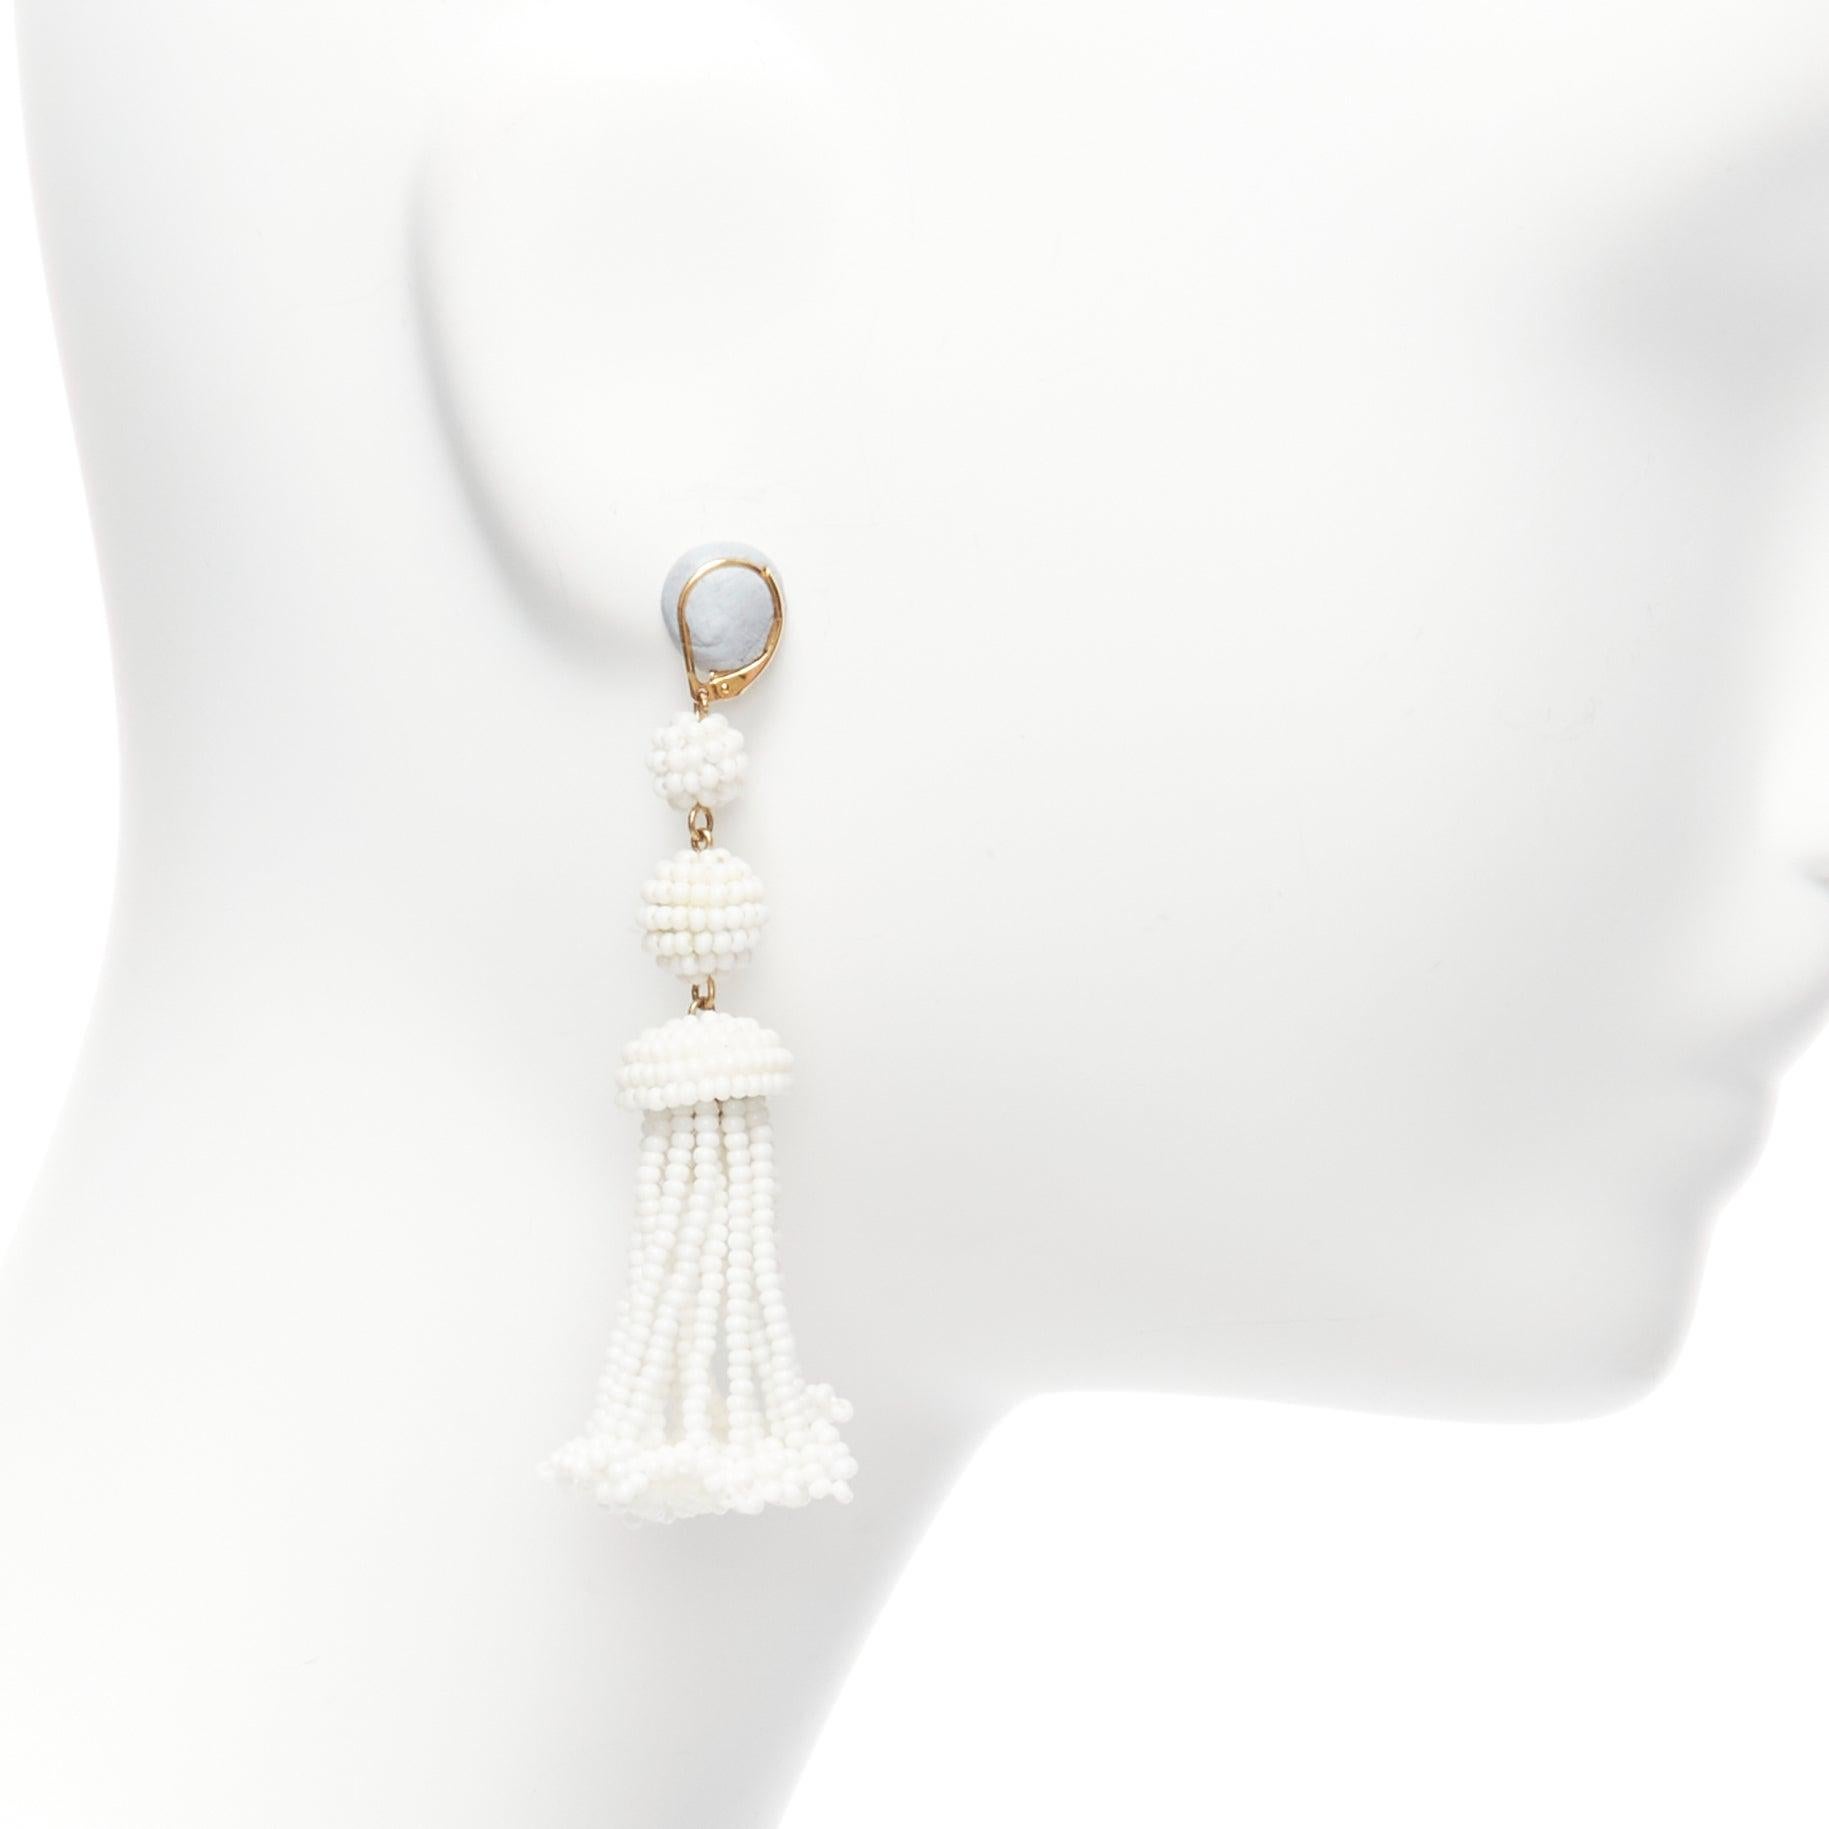 OLD CELINE Phoebe Philo white beaded tassel drop earrings Pair
Reference: BSHW/A00118
Brand: Celine
Designer: Phoebe Philo
Collection: Runway
Material: Plastic
Color: White, Gold
Pattern: Solid
Closure: Loop Through
Lining: Gold Metal
Extra Details: